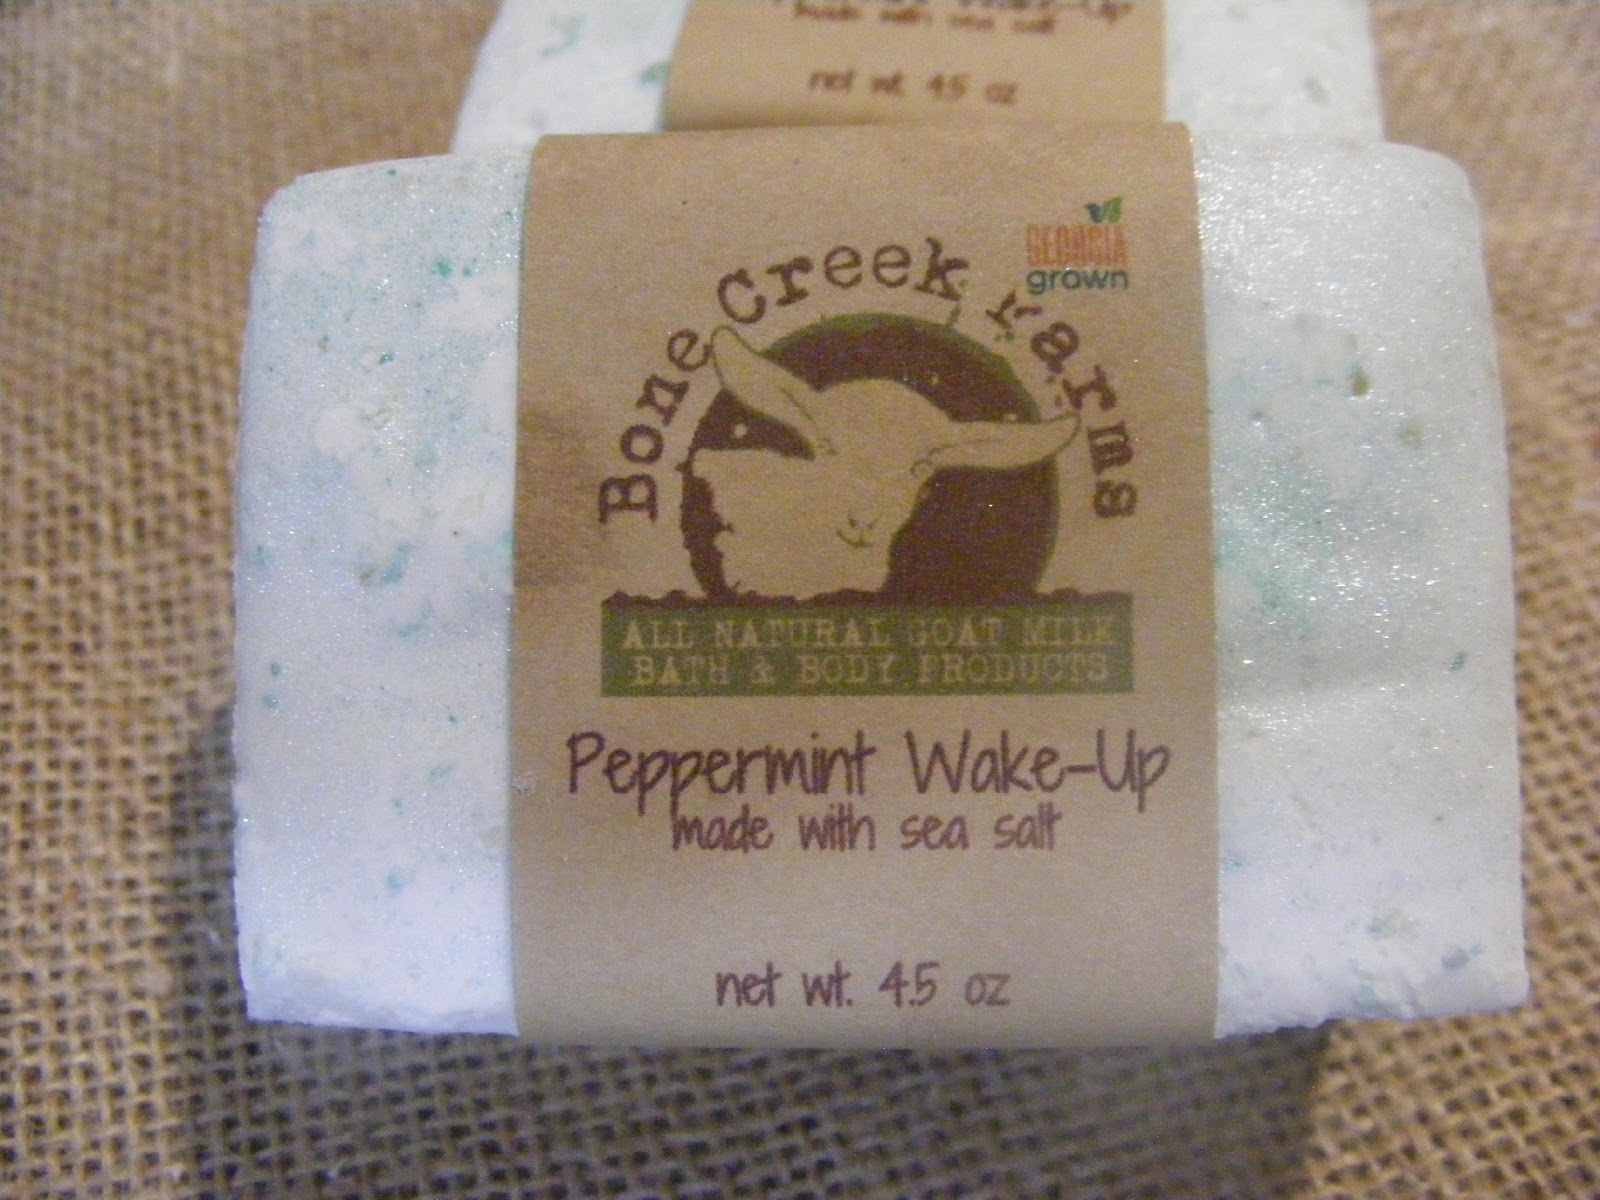 Peppermint Wake-Up